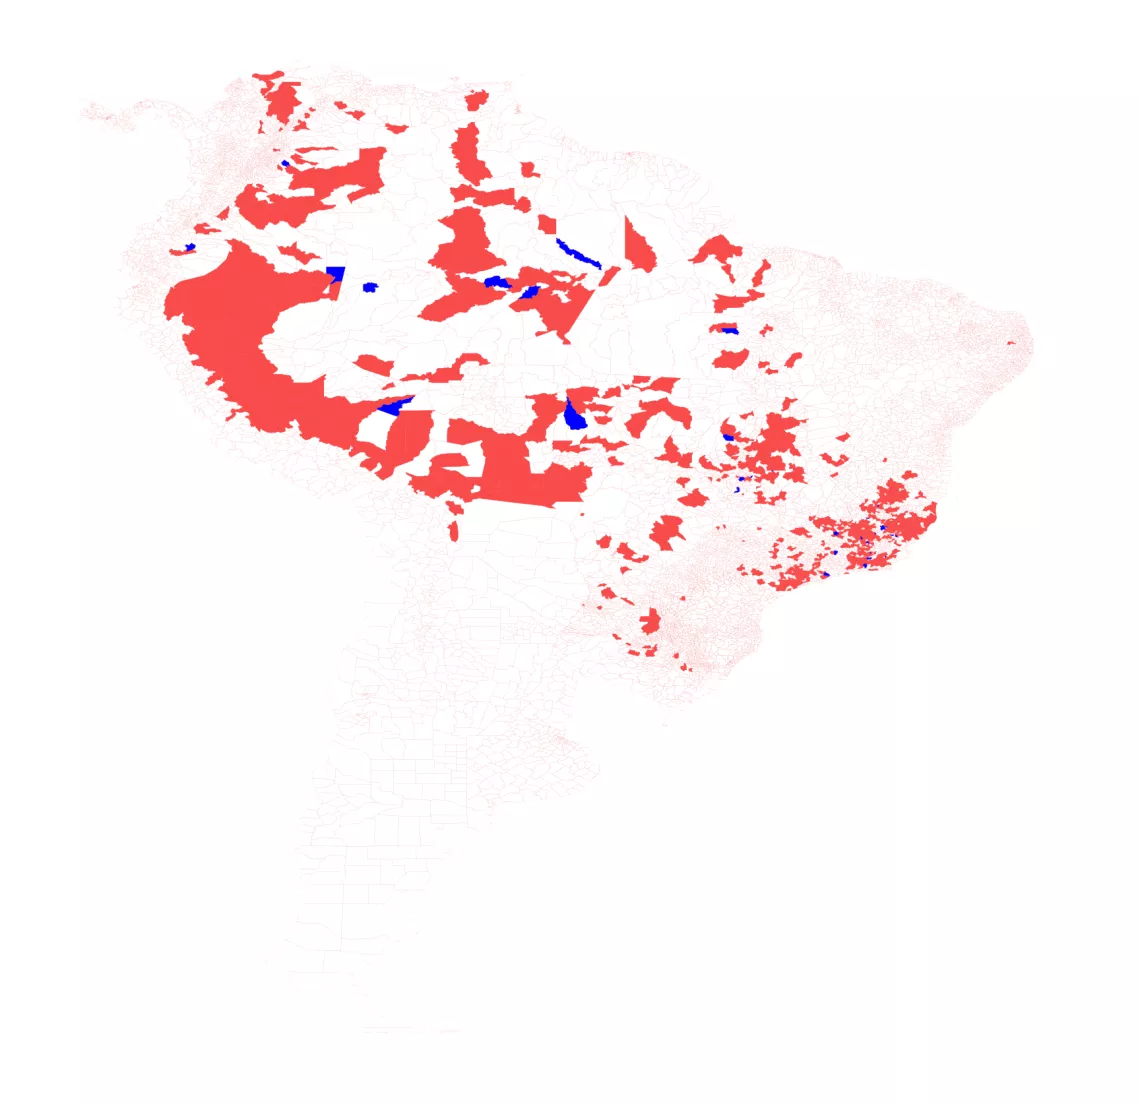 Predicted cases: counties where the algorithm correctly predicted yellow fever cases are colored in red, and counties where the algorithm incorrectly predicted cases are shown in blue.